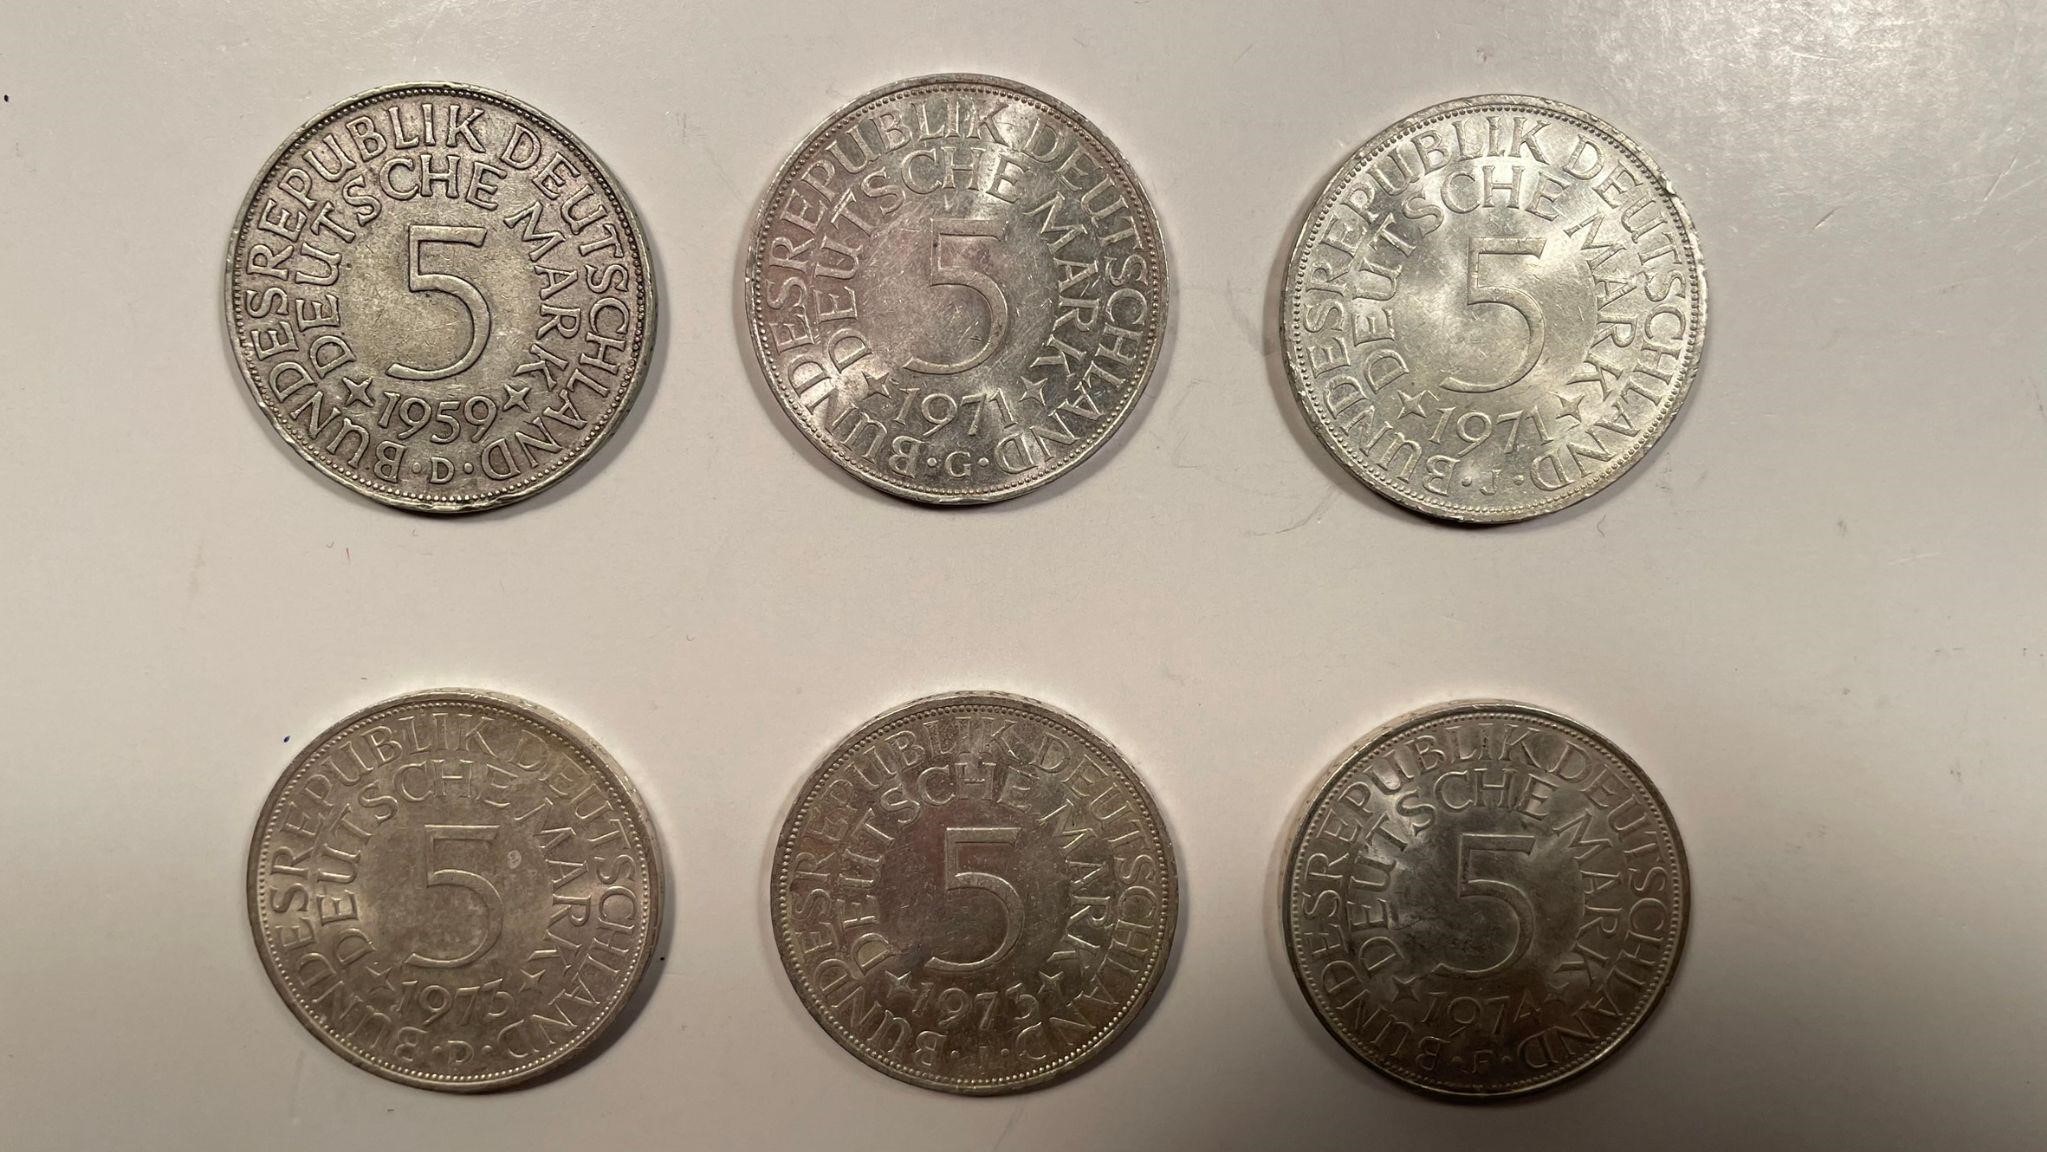 SIX 5 MARK GERMANY COINS CIRC. TO UNC.